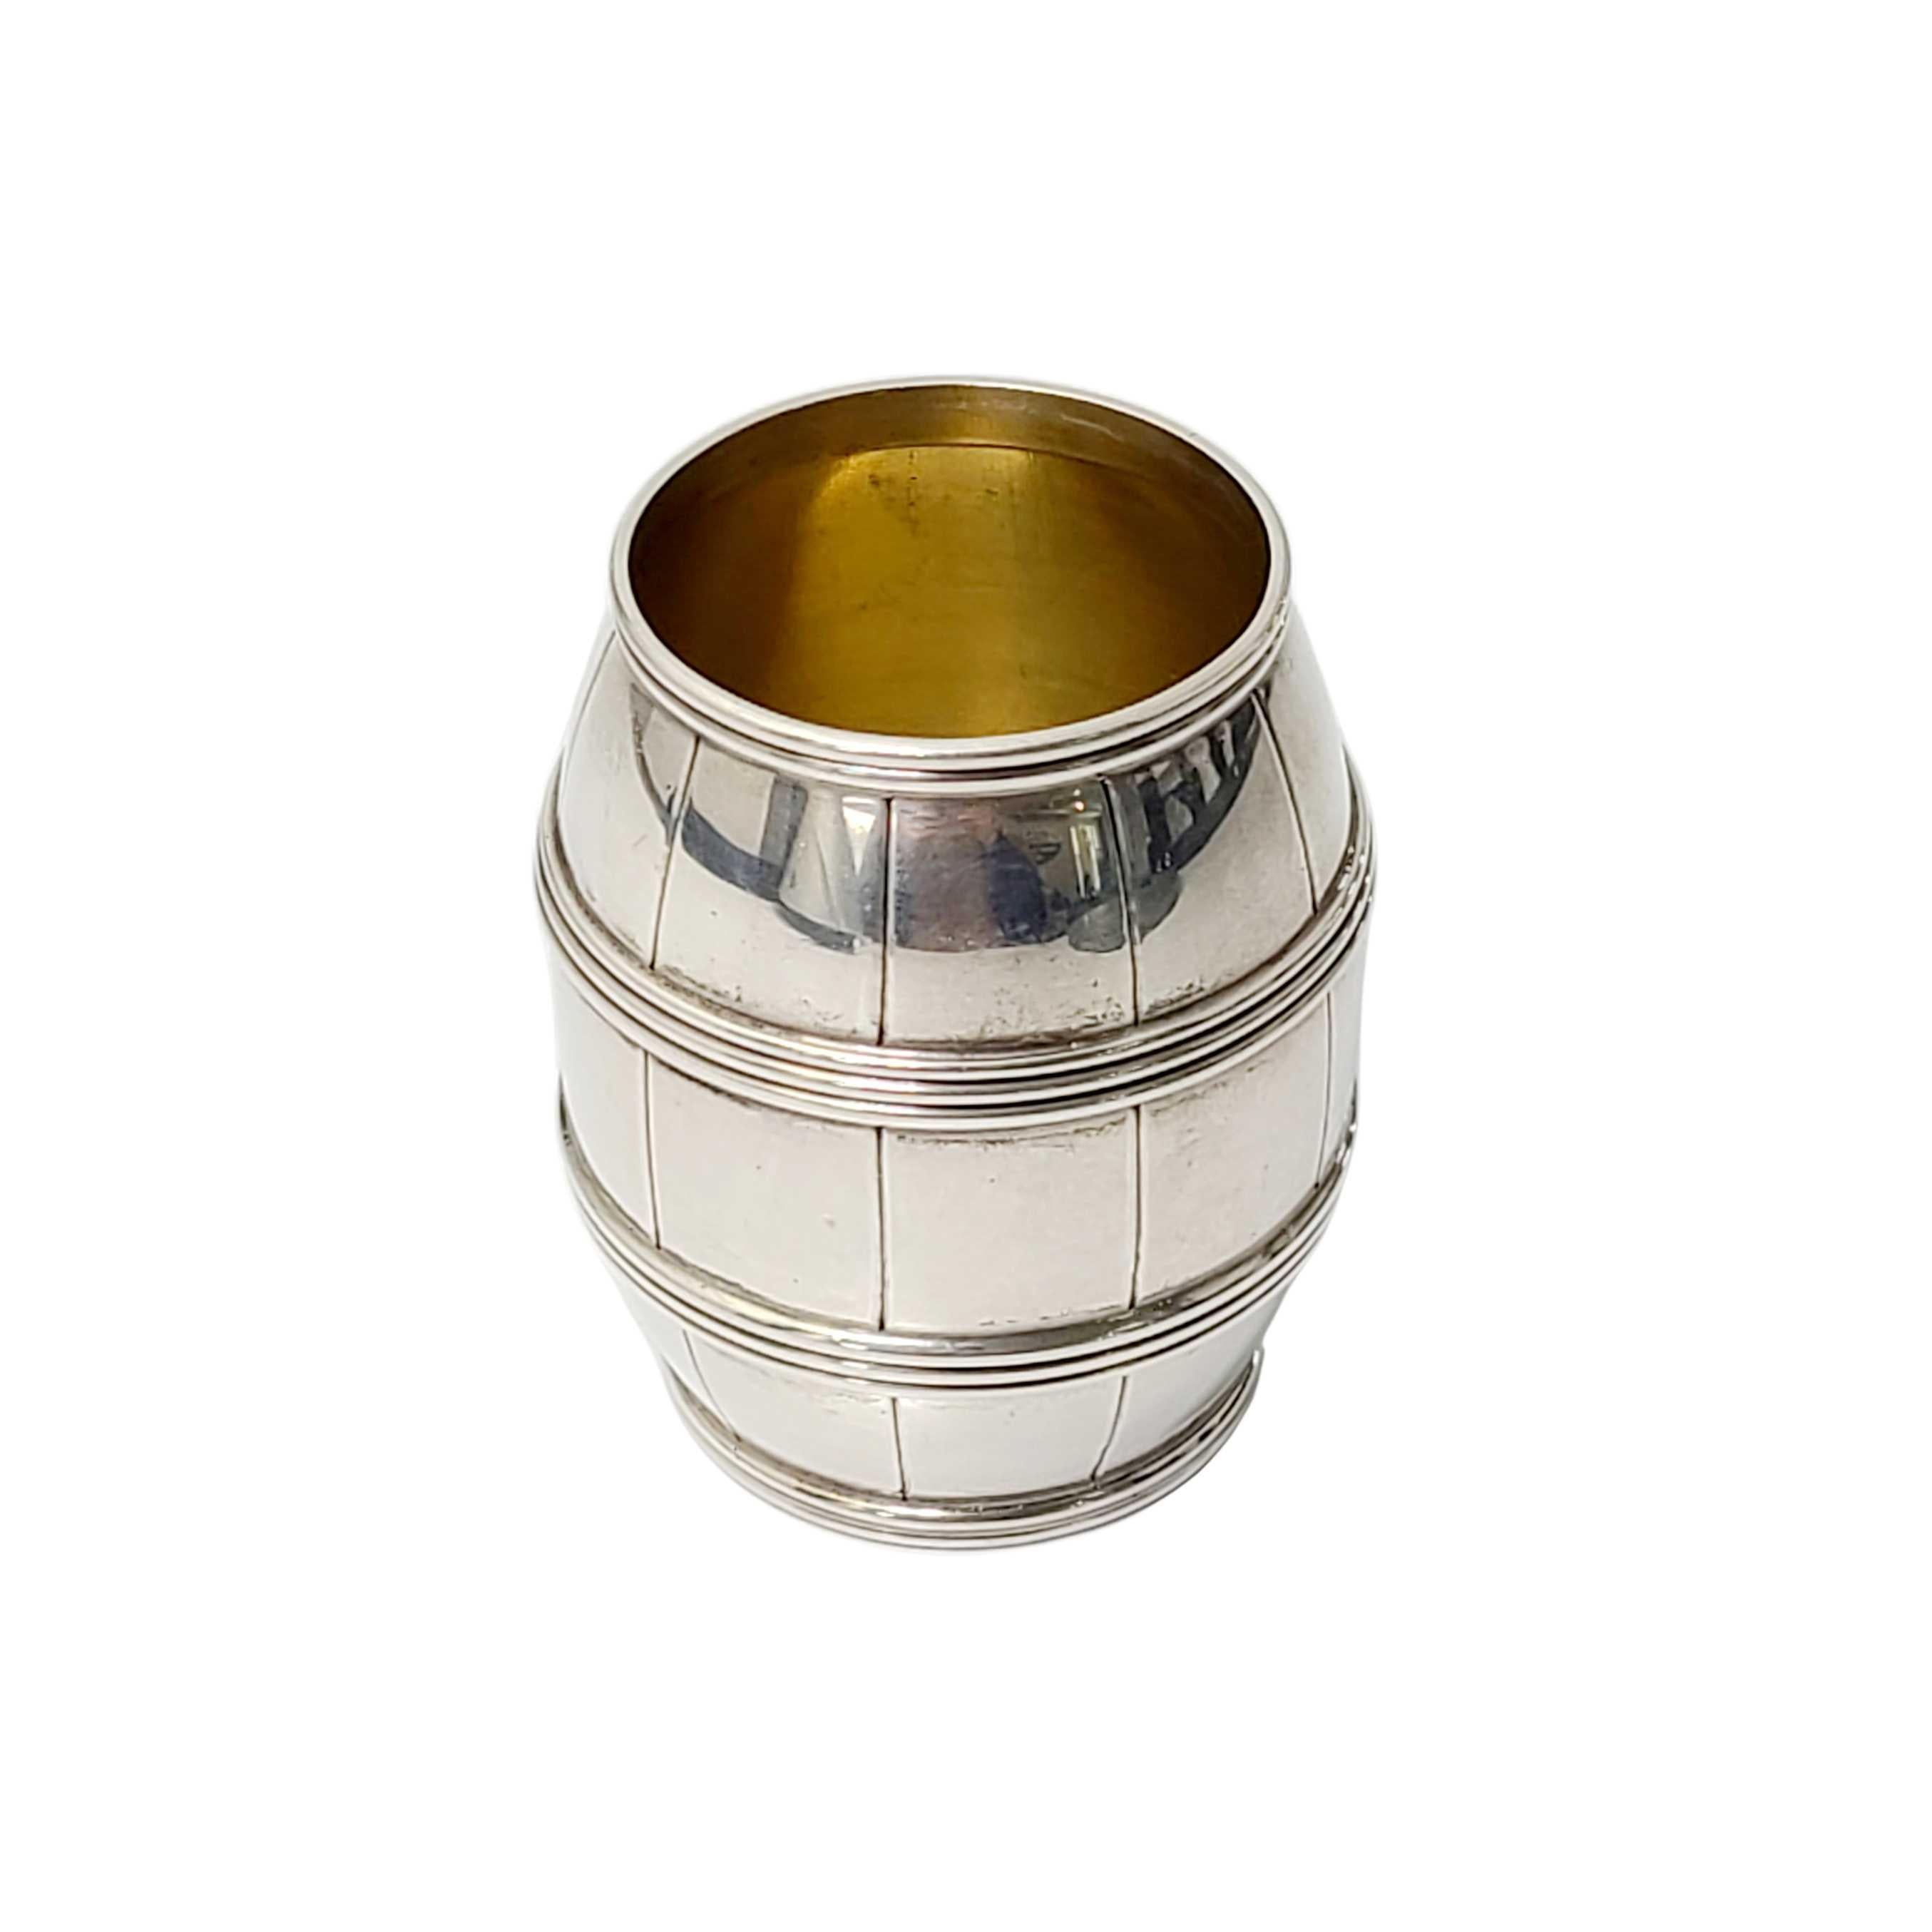 Sterling silver barrel by Tiffany & Co.

No monogram.

This simple but highly detailed barrel can be used as a toothpick holder, or for any other small trinkets. Gold washed interior. Tiffany & Co box or pouch not included.

Measures: 2 1/2